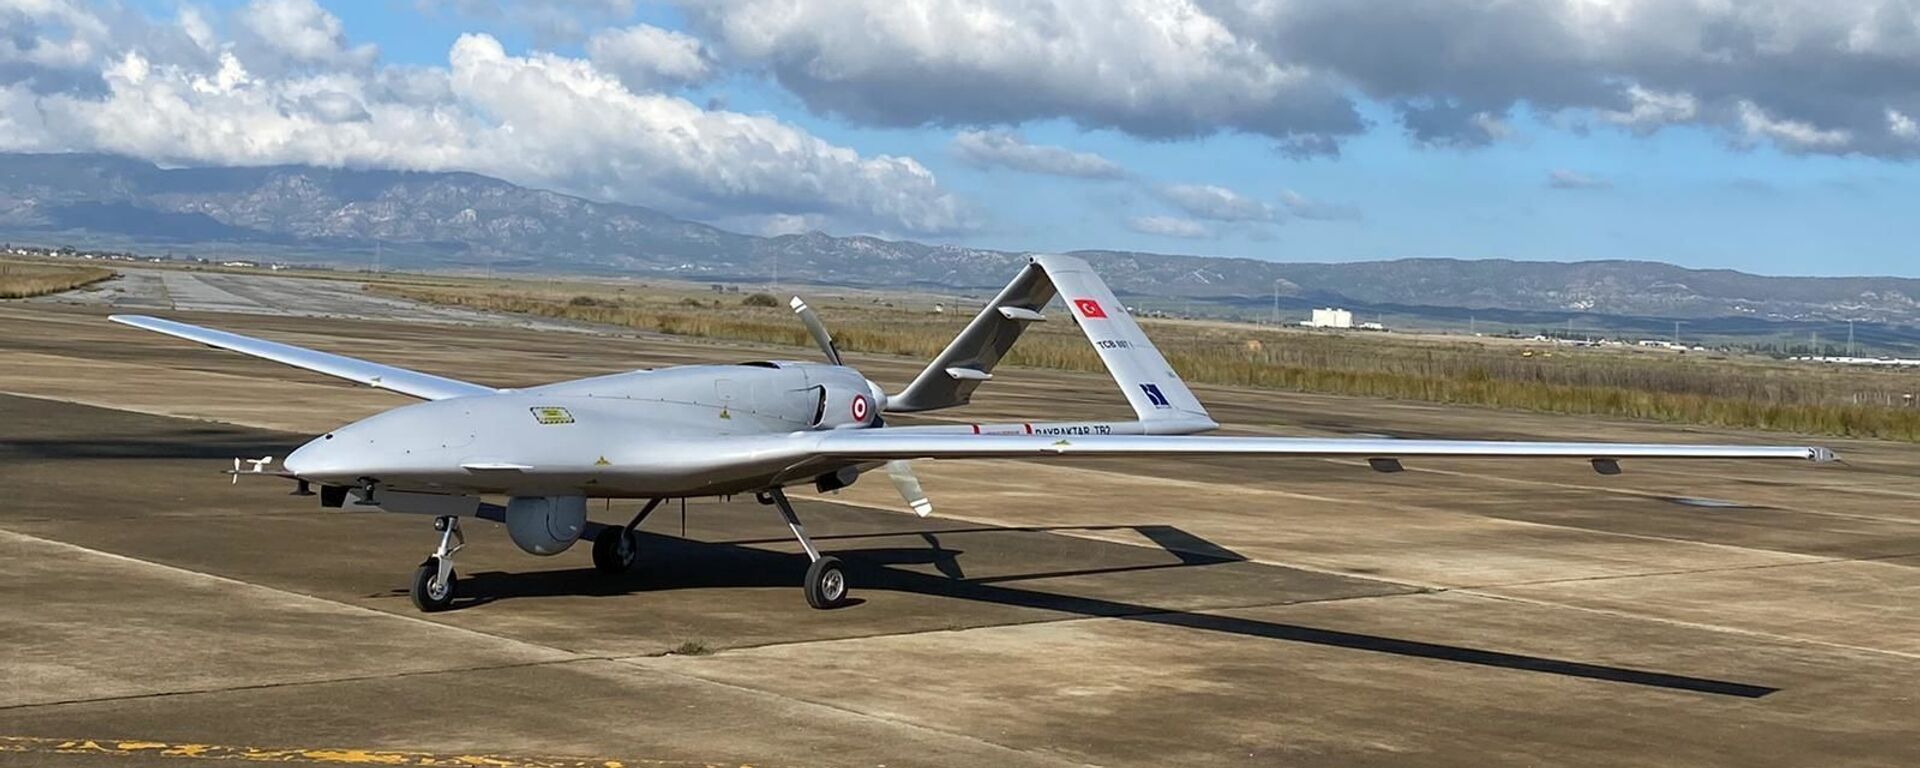 A Turkish-made Bayraktar TB2 drone is seen shortly after its landing at an airport in Gecitkala, known as Lefkoniko in Greek, in Cyprus, Monday, Dec. 16, 2019 - Sputnik International, 1920, 07.02.2022